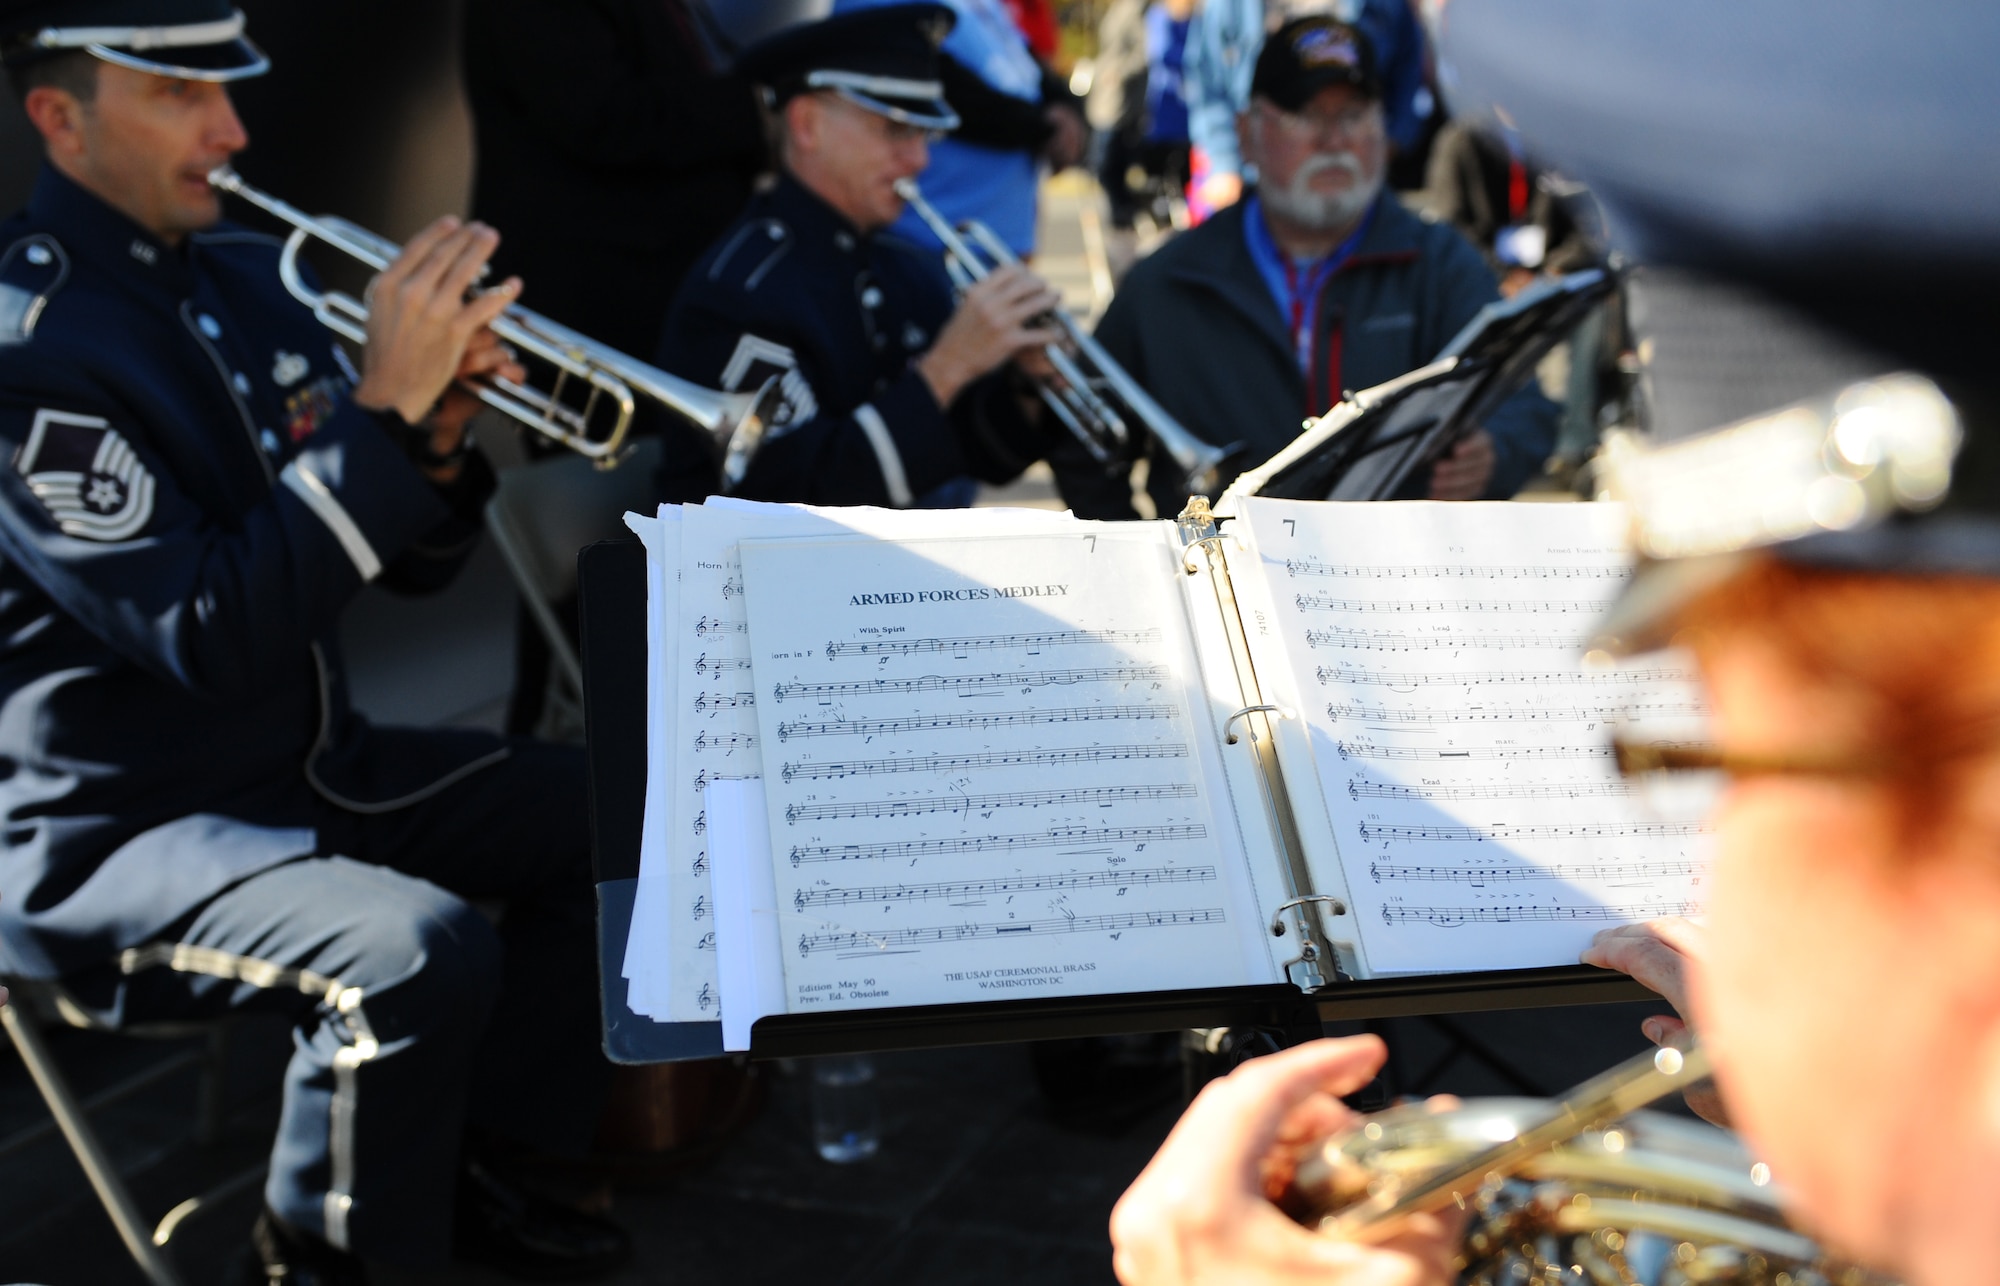 The Air Force Quintet performs the “Armed Forces Medley” as veterans stand up during their services’ songs at the Veterans Day ceremony at the Air Force Memorial Nov. 11, 2015. It’s estimated that 7 percent of the U.S. population are veterans and only 1 percent currently serve on behalf of the nation. (U.S. Air Force photo/Tech. Sgt. Bryan Franks)